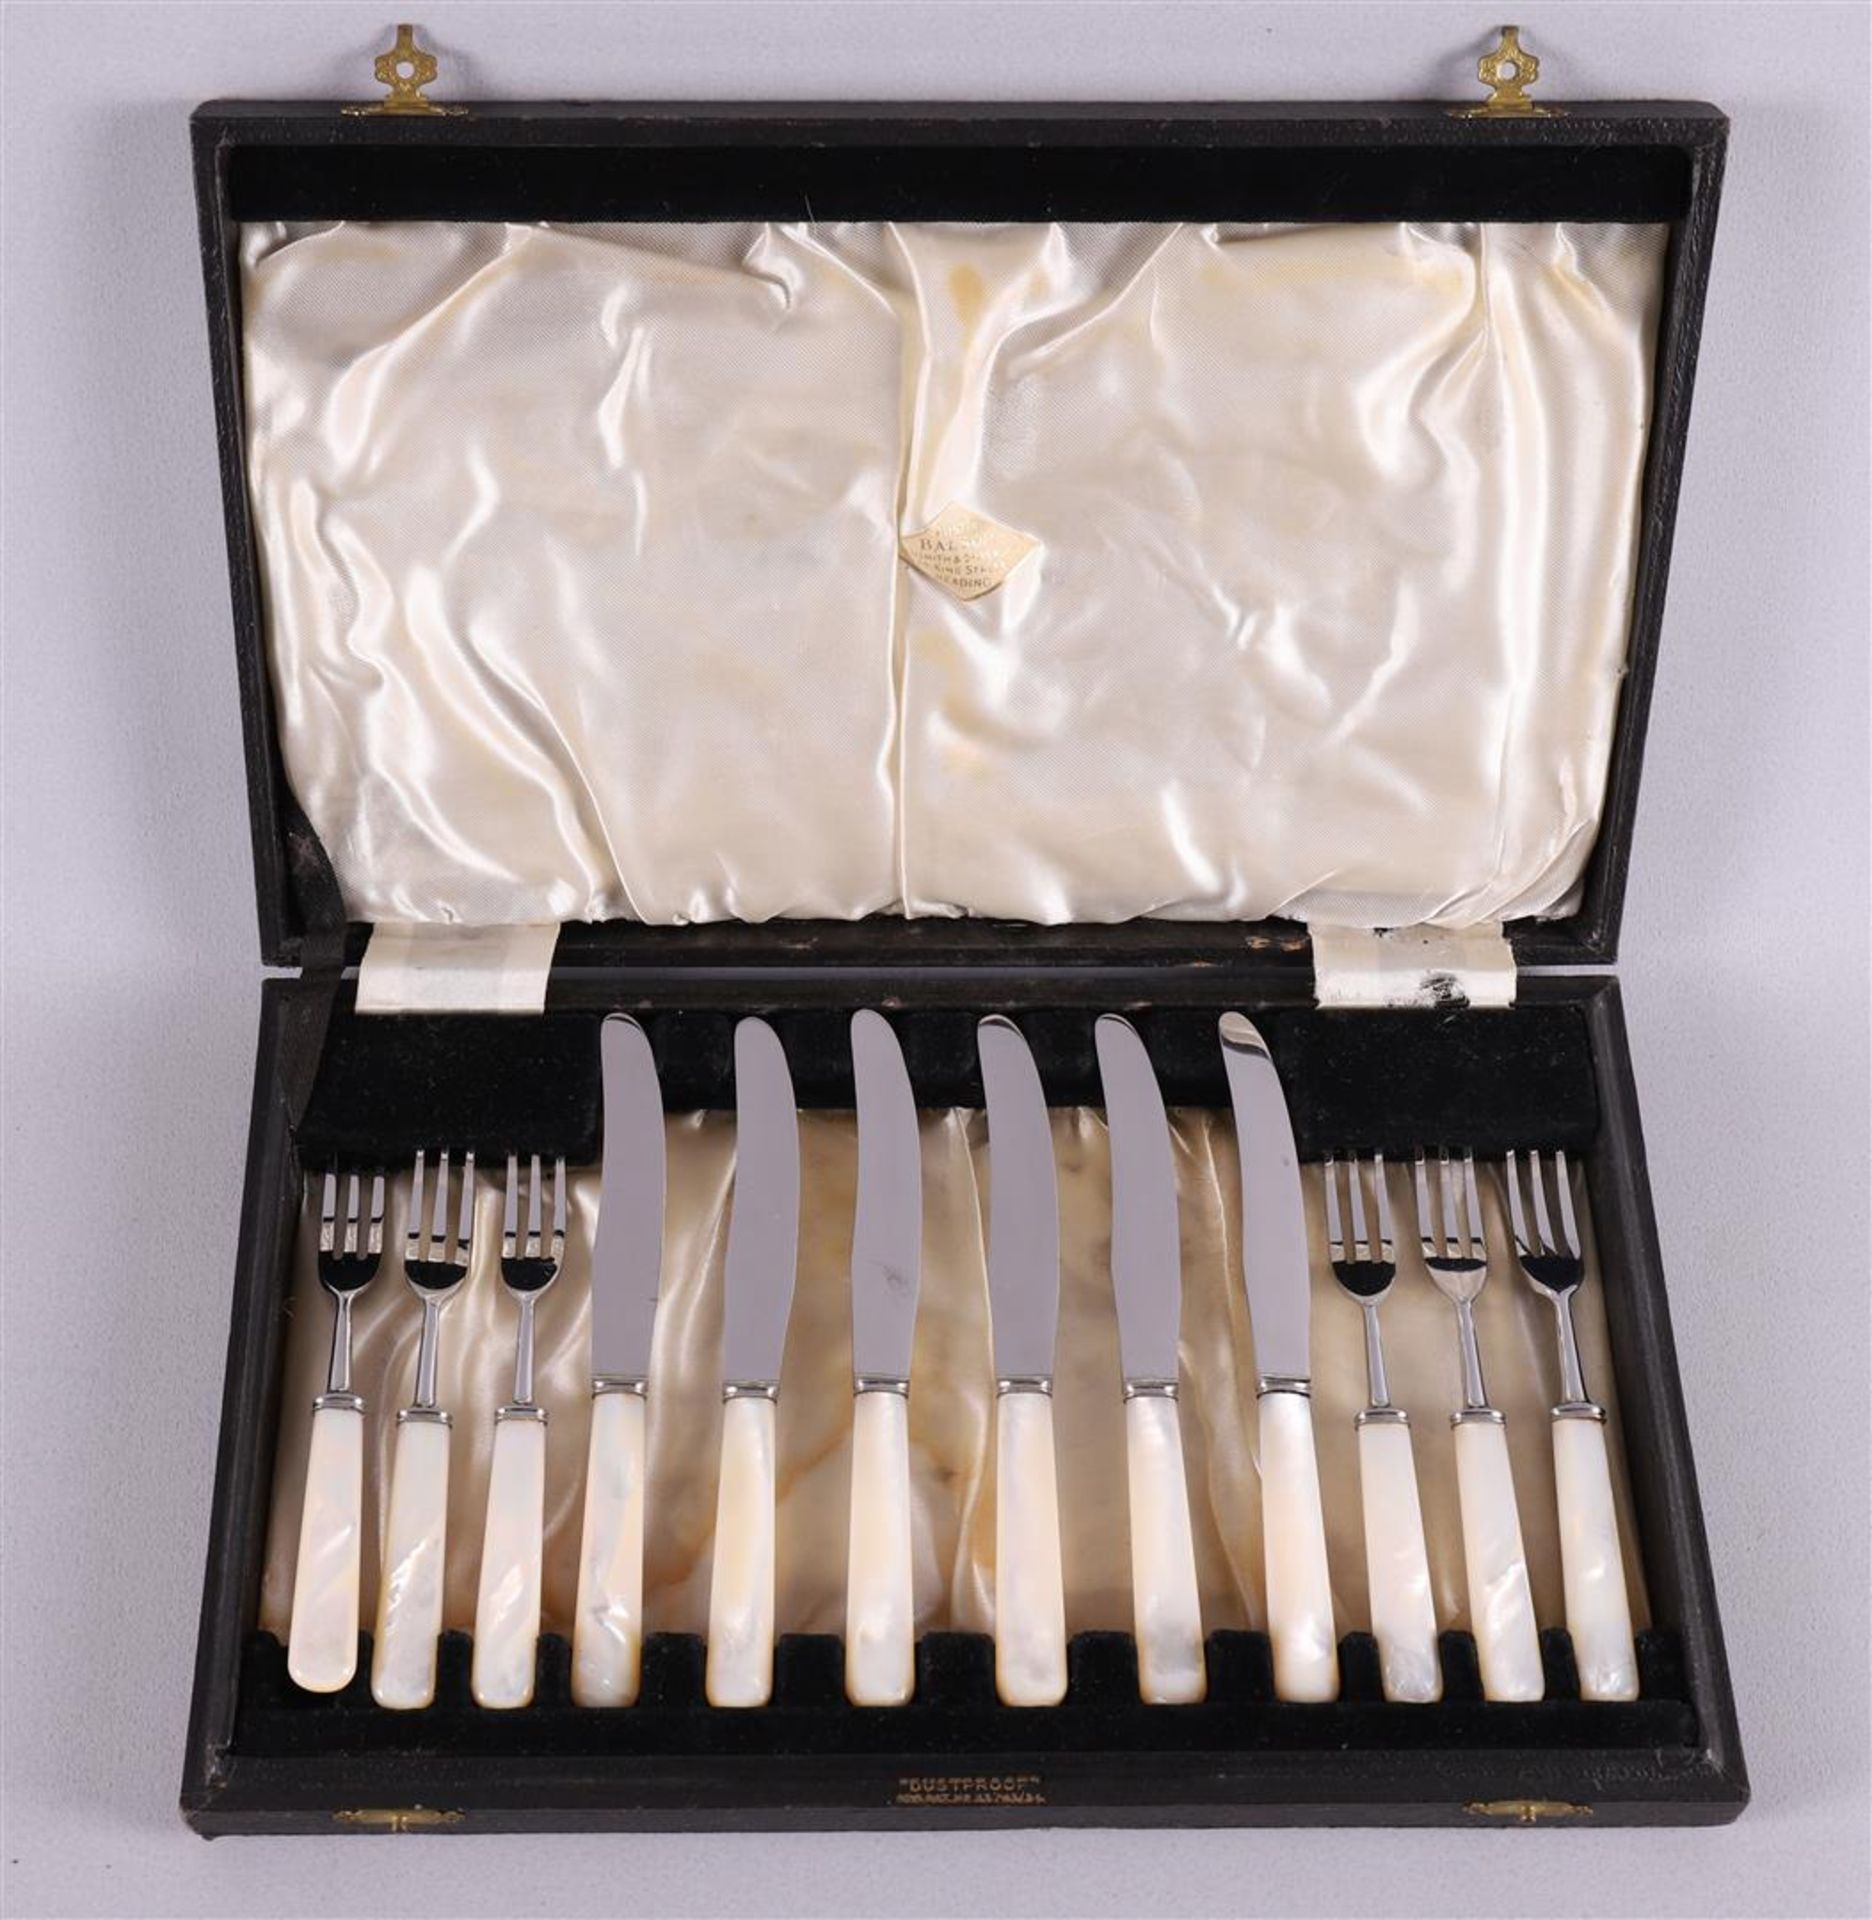 A fruit cutlery with mother-of-pearl handles in original cassette, around 1900.